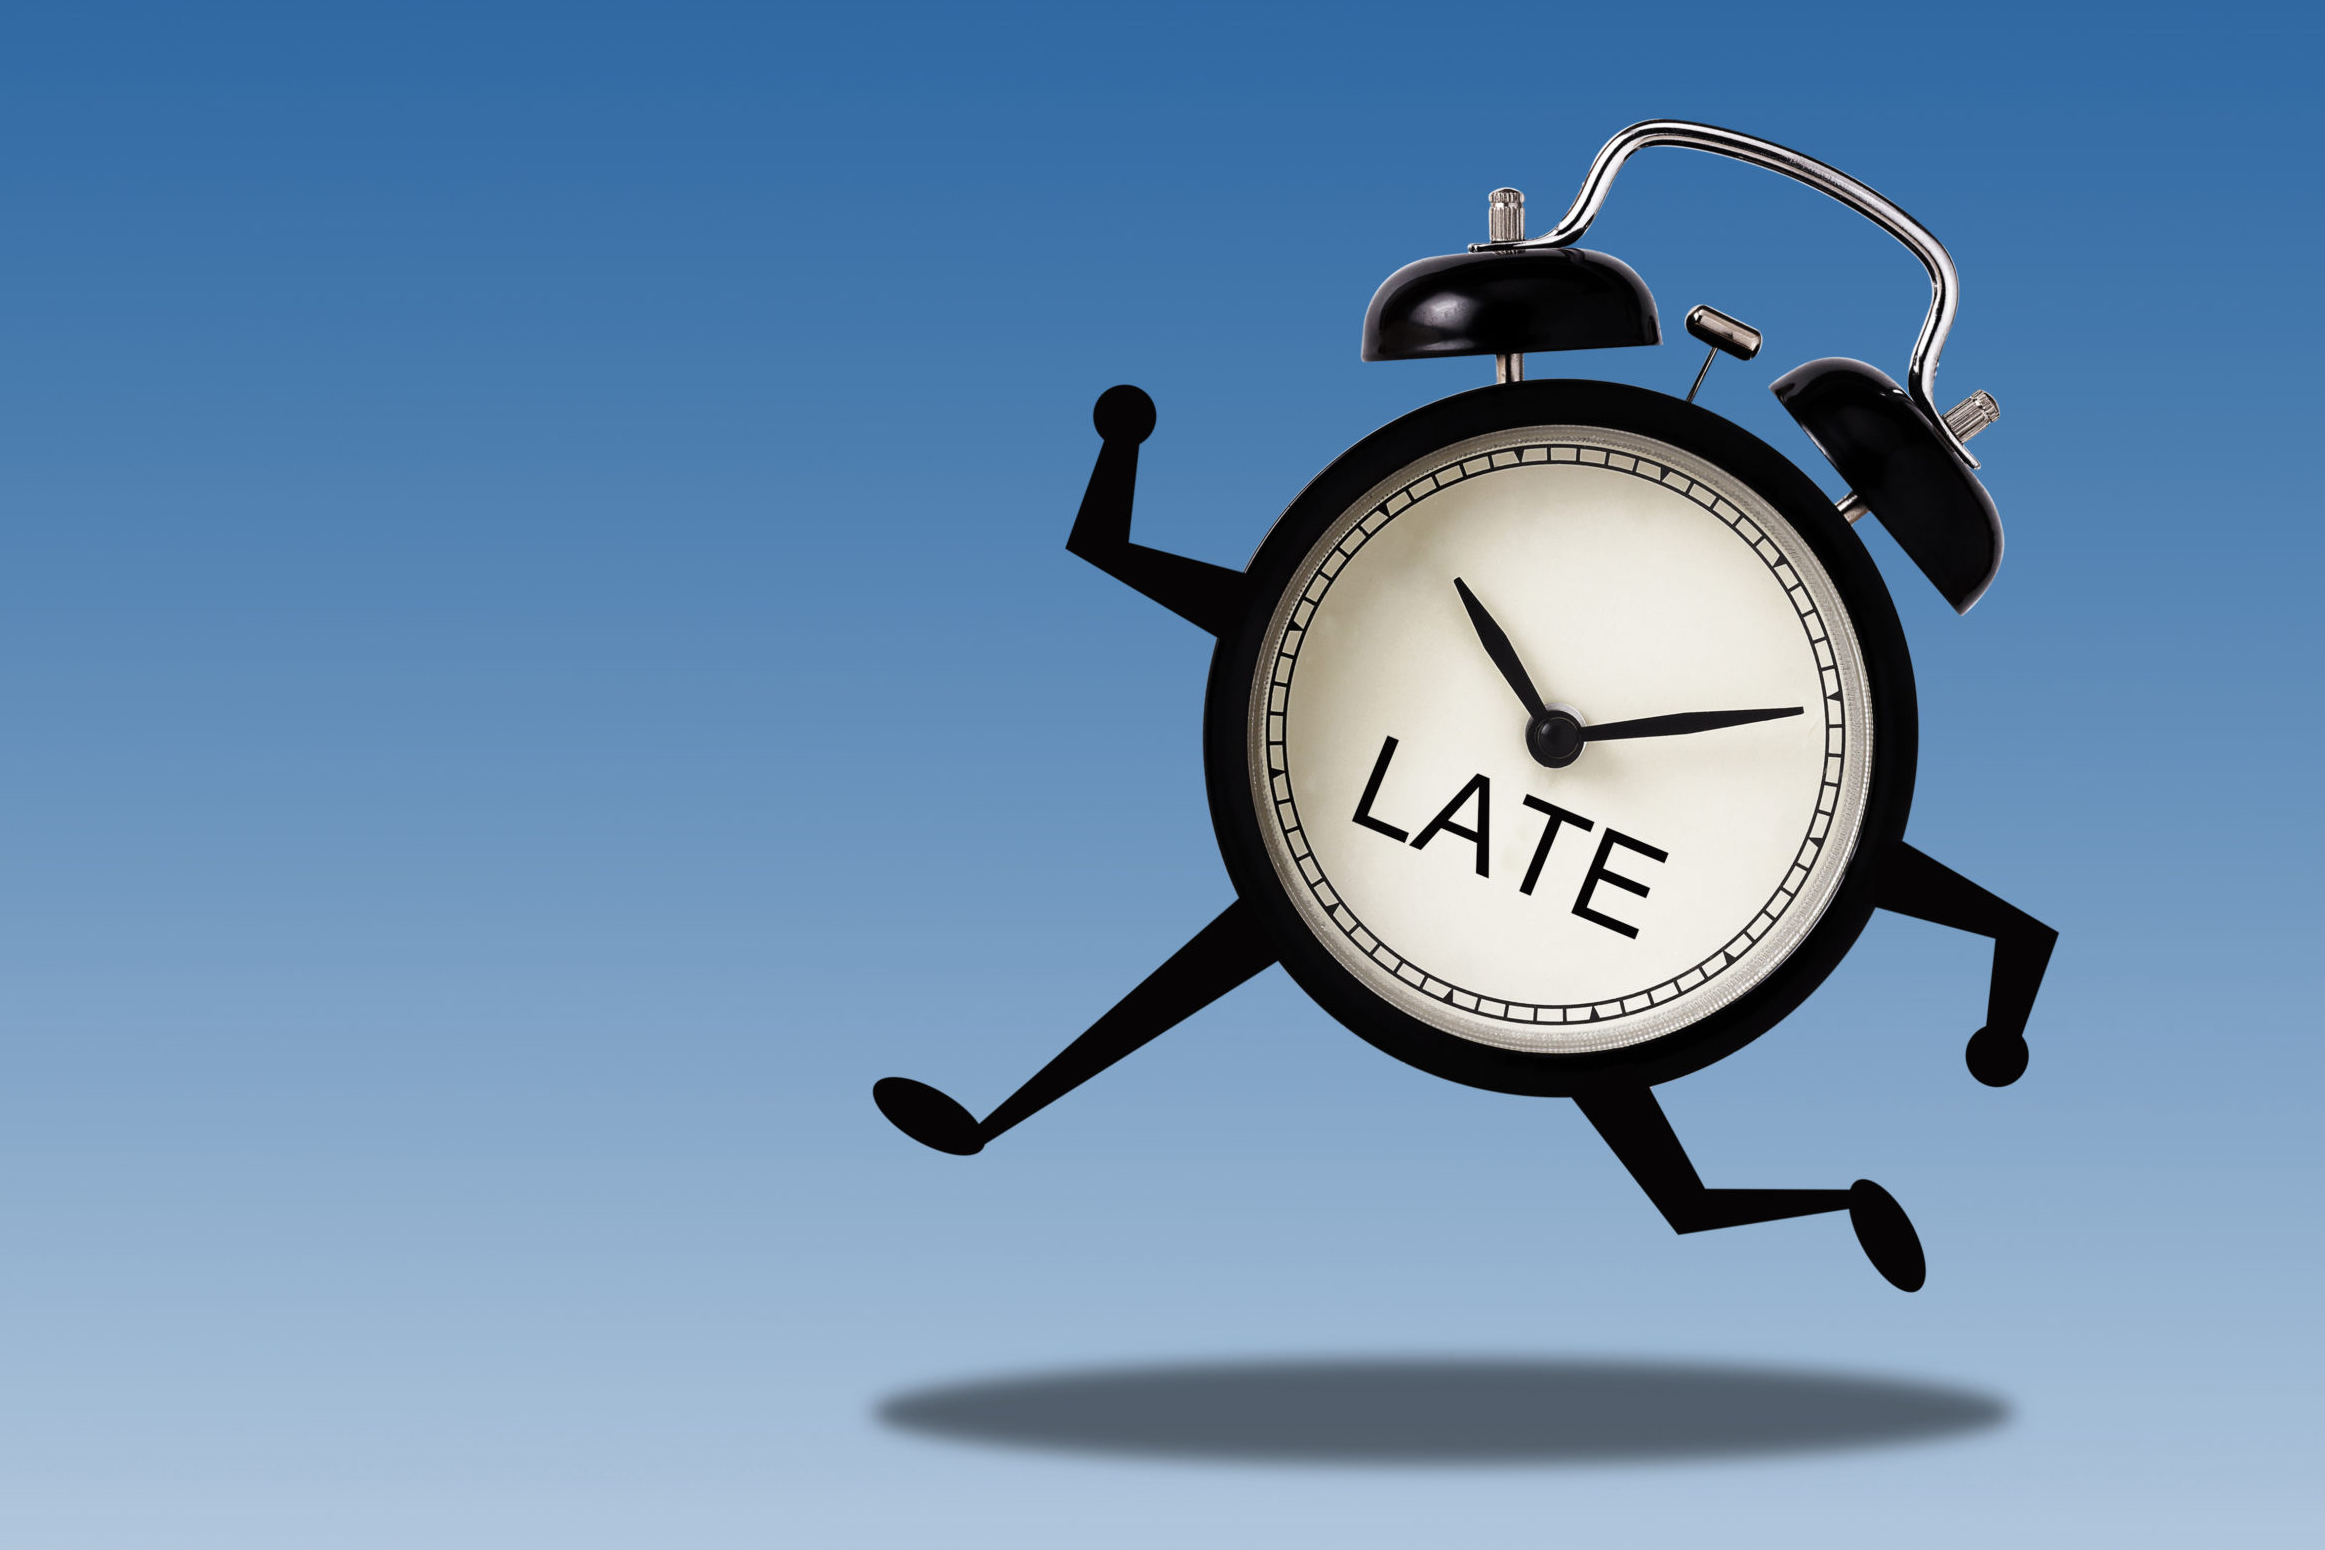 Clock wih the word "LATE" written on its face